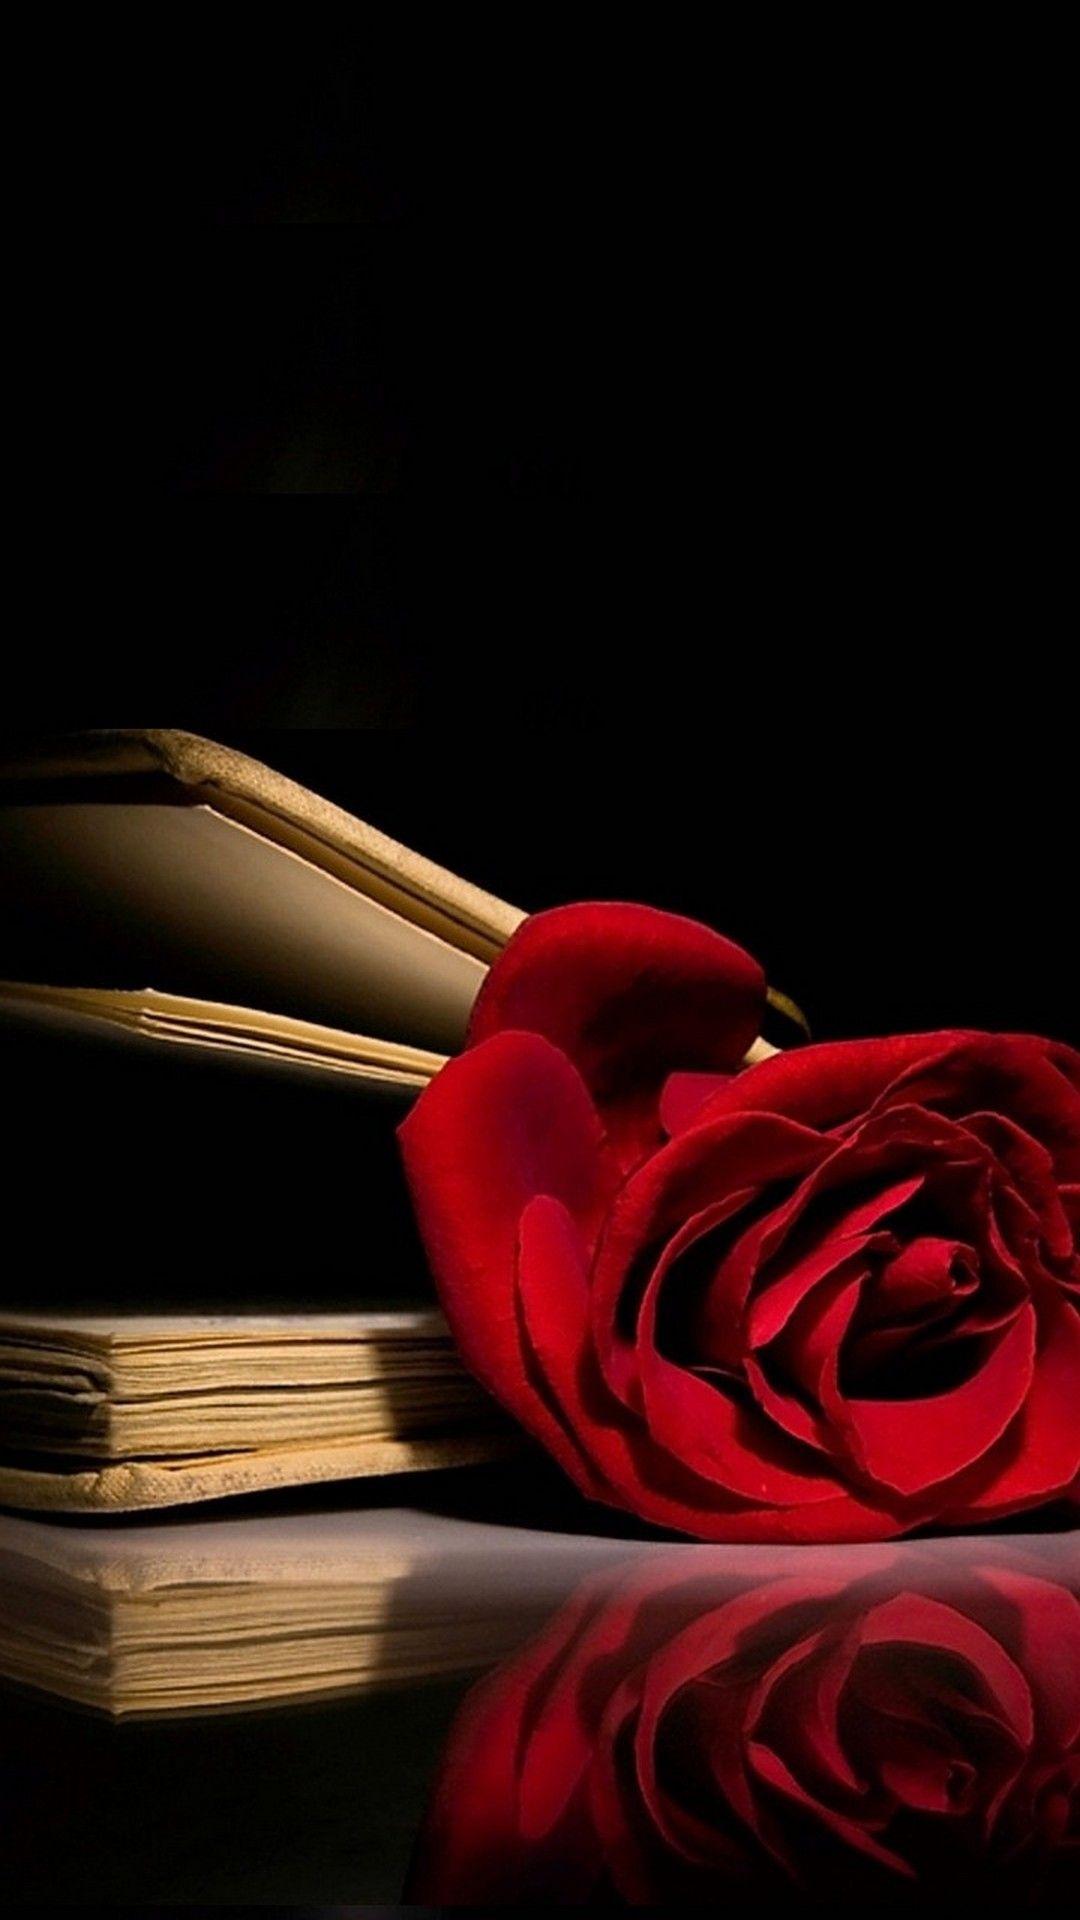 Rose iPhone Wallpapers - Top Free Rose iPhone Backgrounds - WallpaperAccess